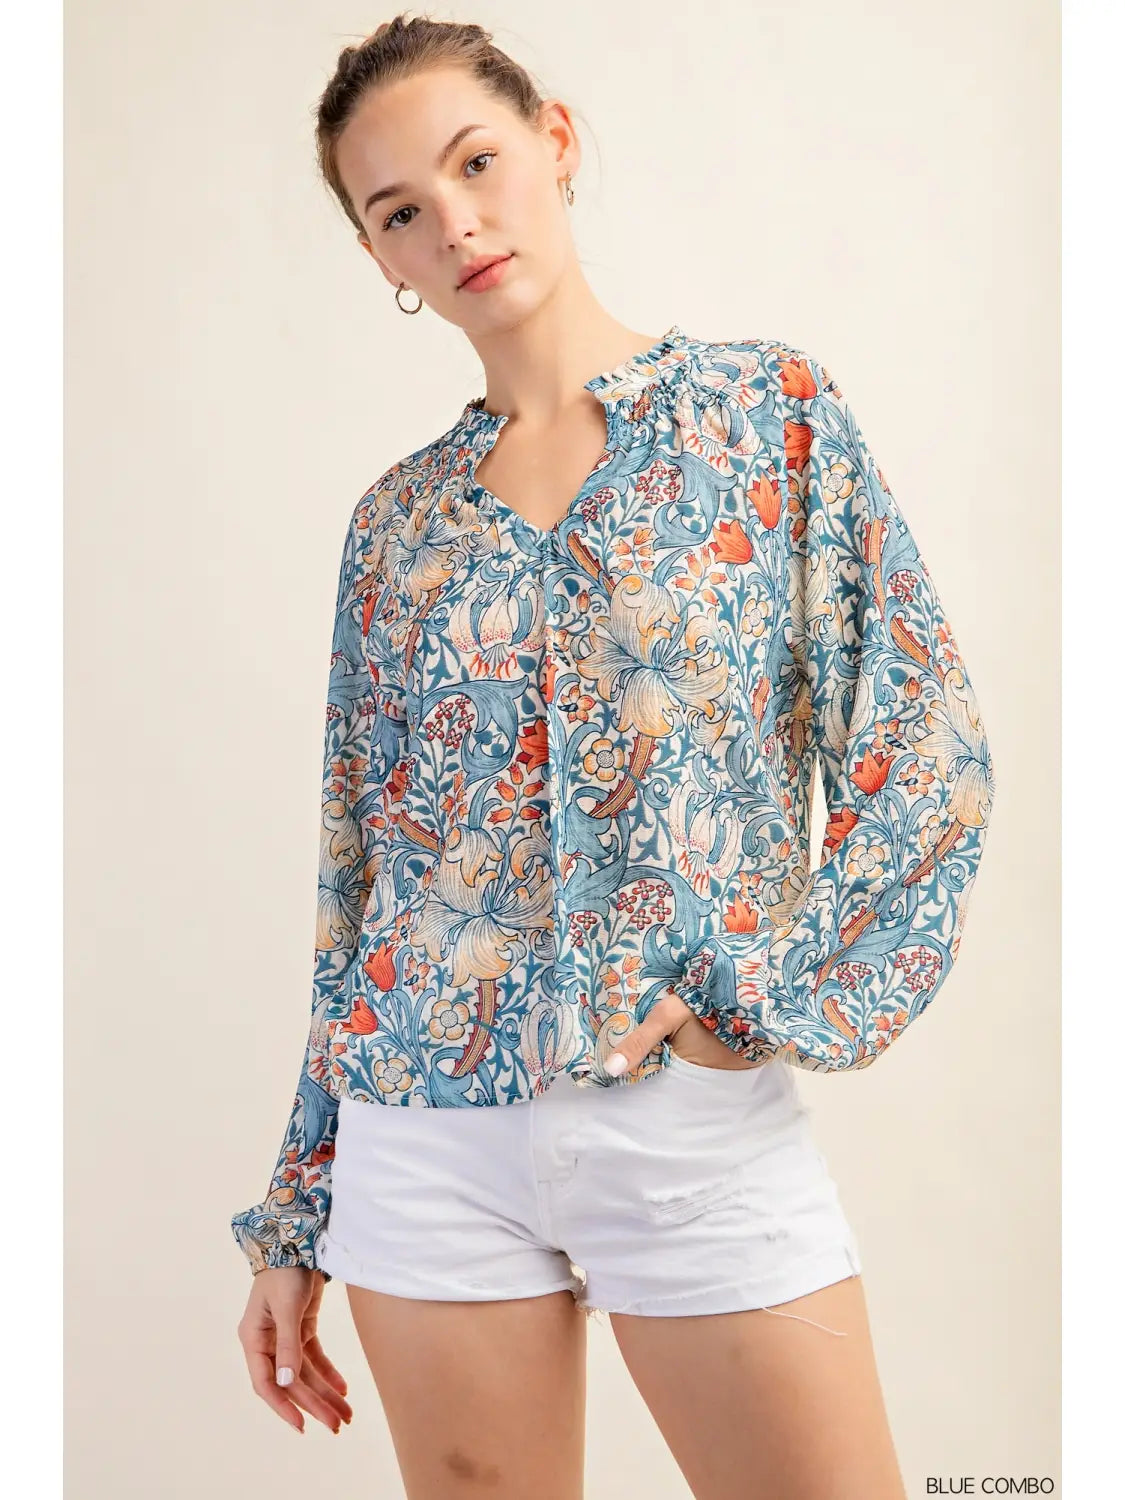 The Pomelo Top